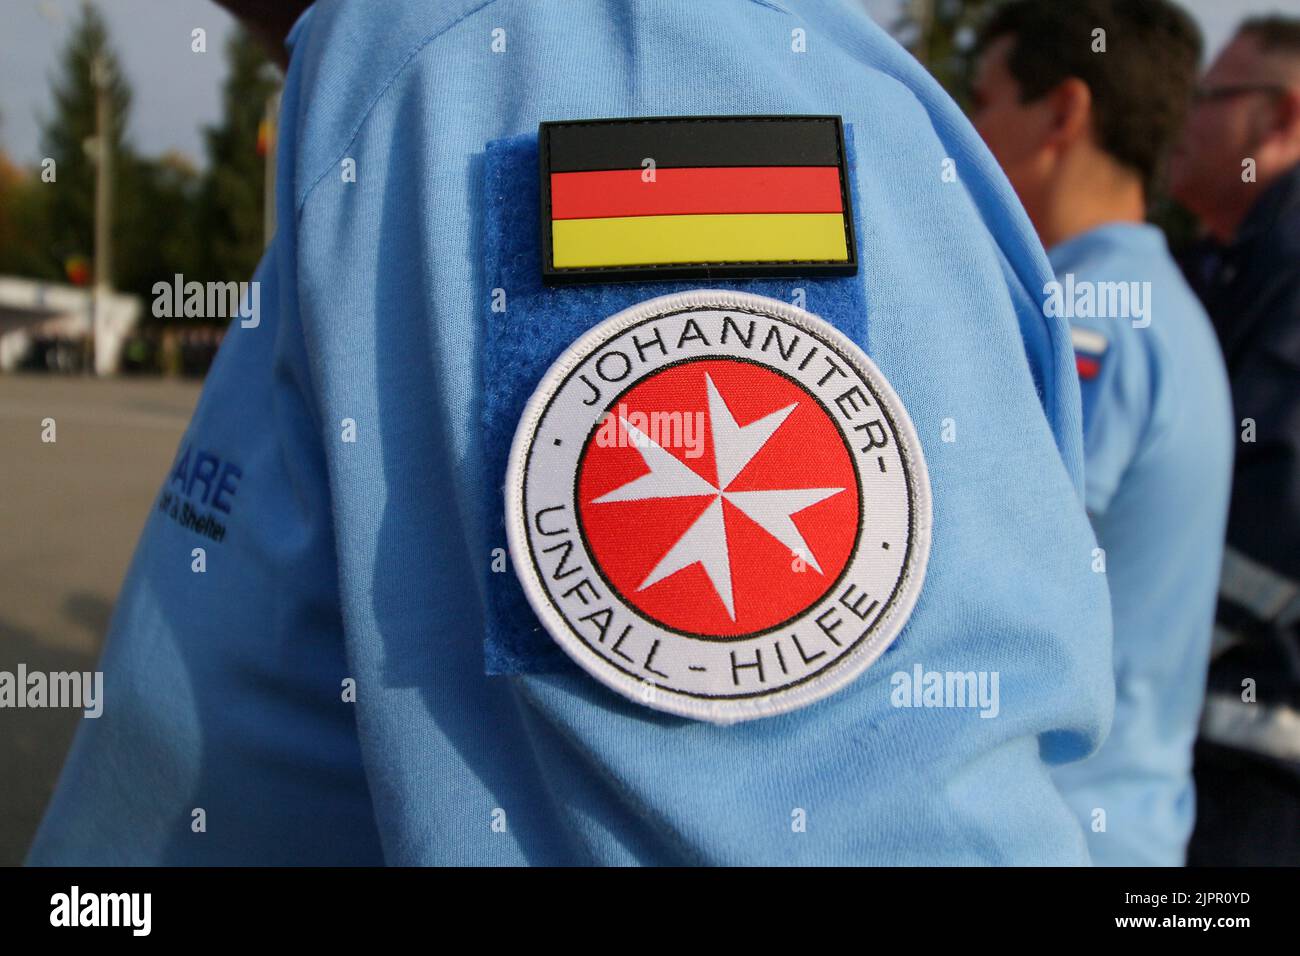 Bucharest, Romania - October 18, 2018: Teams at EU Module Exercises 'EU ModEX 2018' urban search and rescue civil protection exercise. This image is f Stock Photo